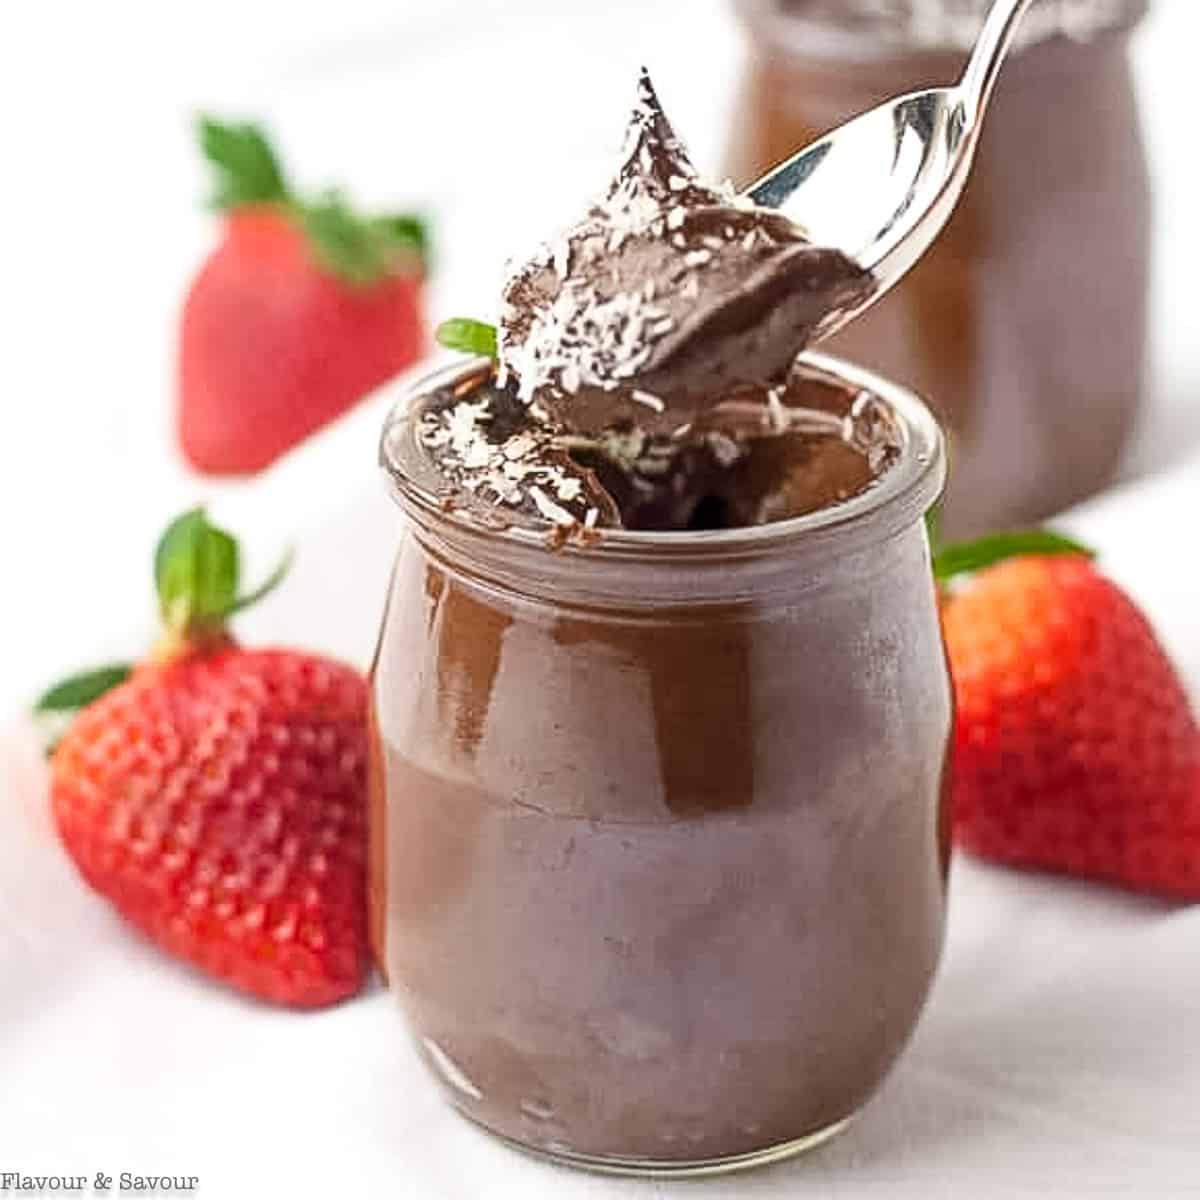 a spoonful of vegan chocolate mousse made with avocado and banana